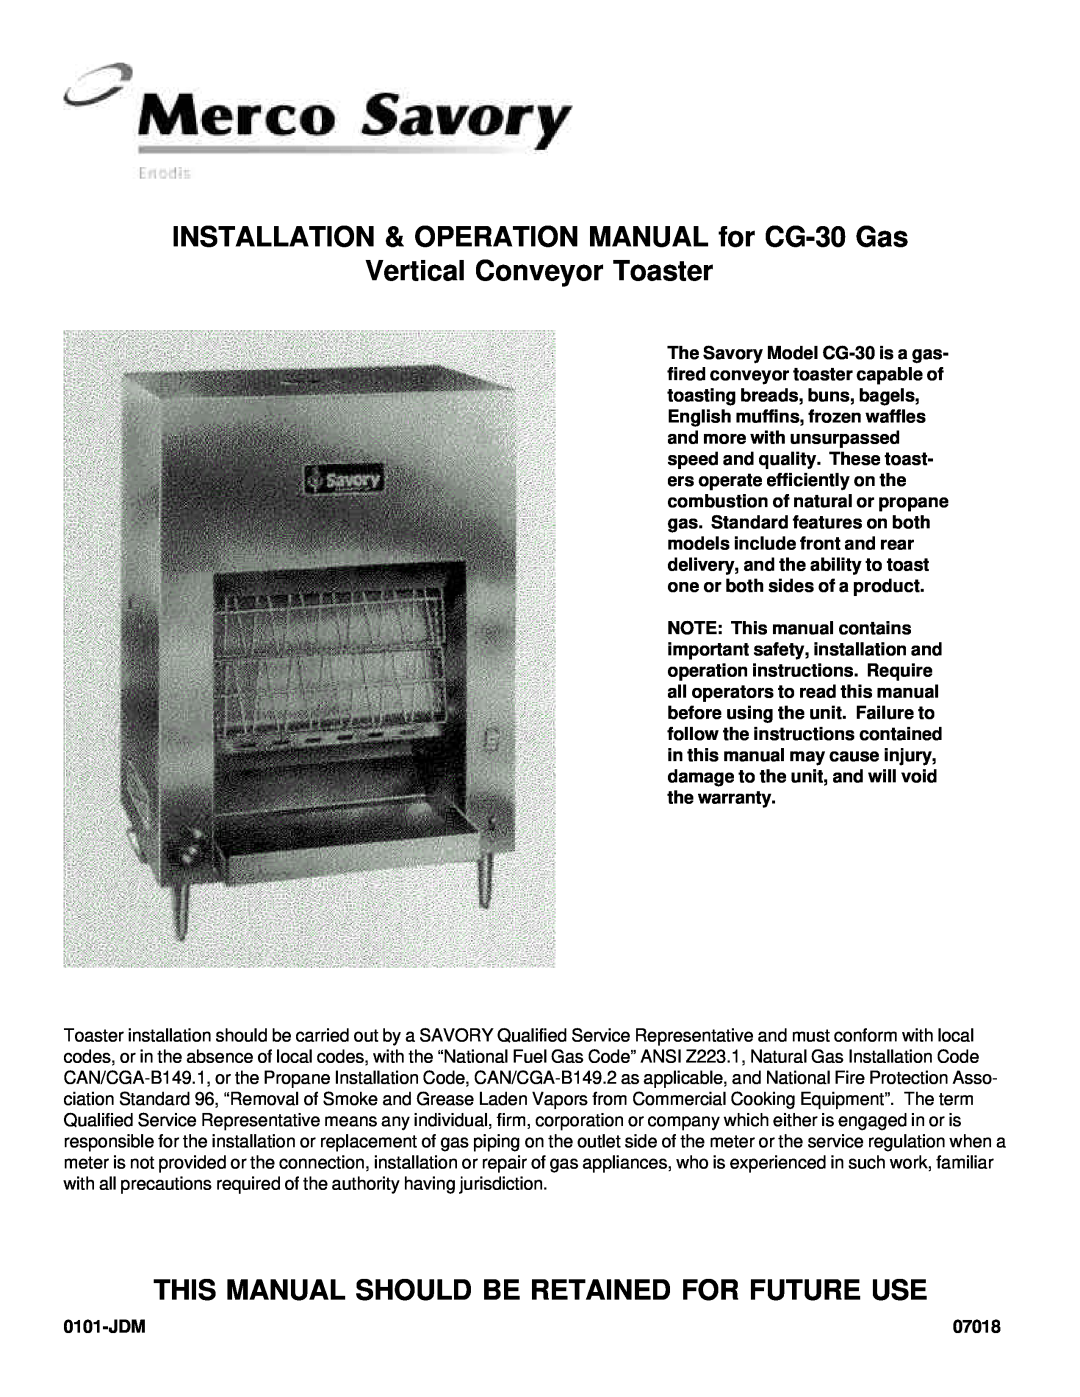 Merco Savory CG-30 operation manual Vertical Conveyor Toaster, This Manual Should Be Retained For Future Use 